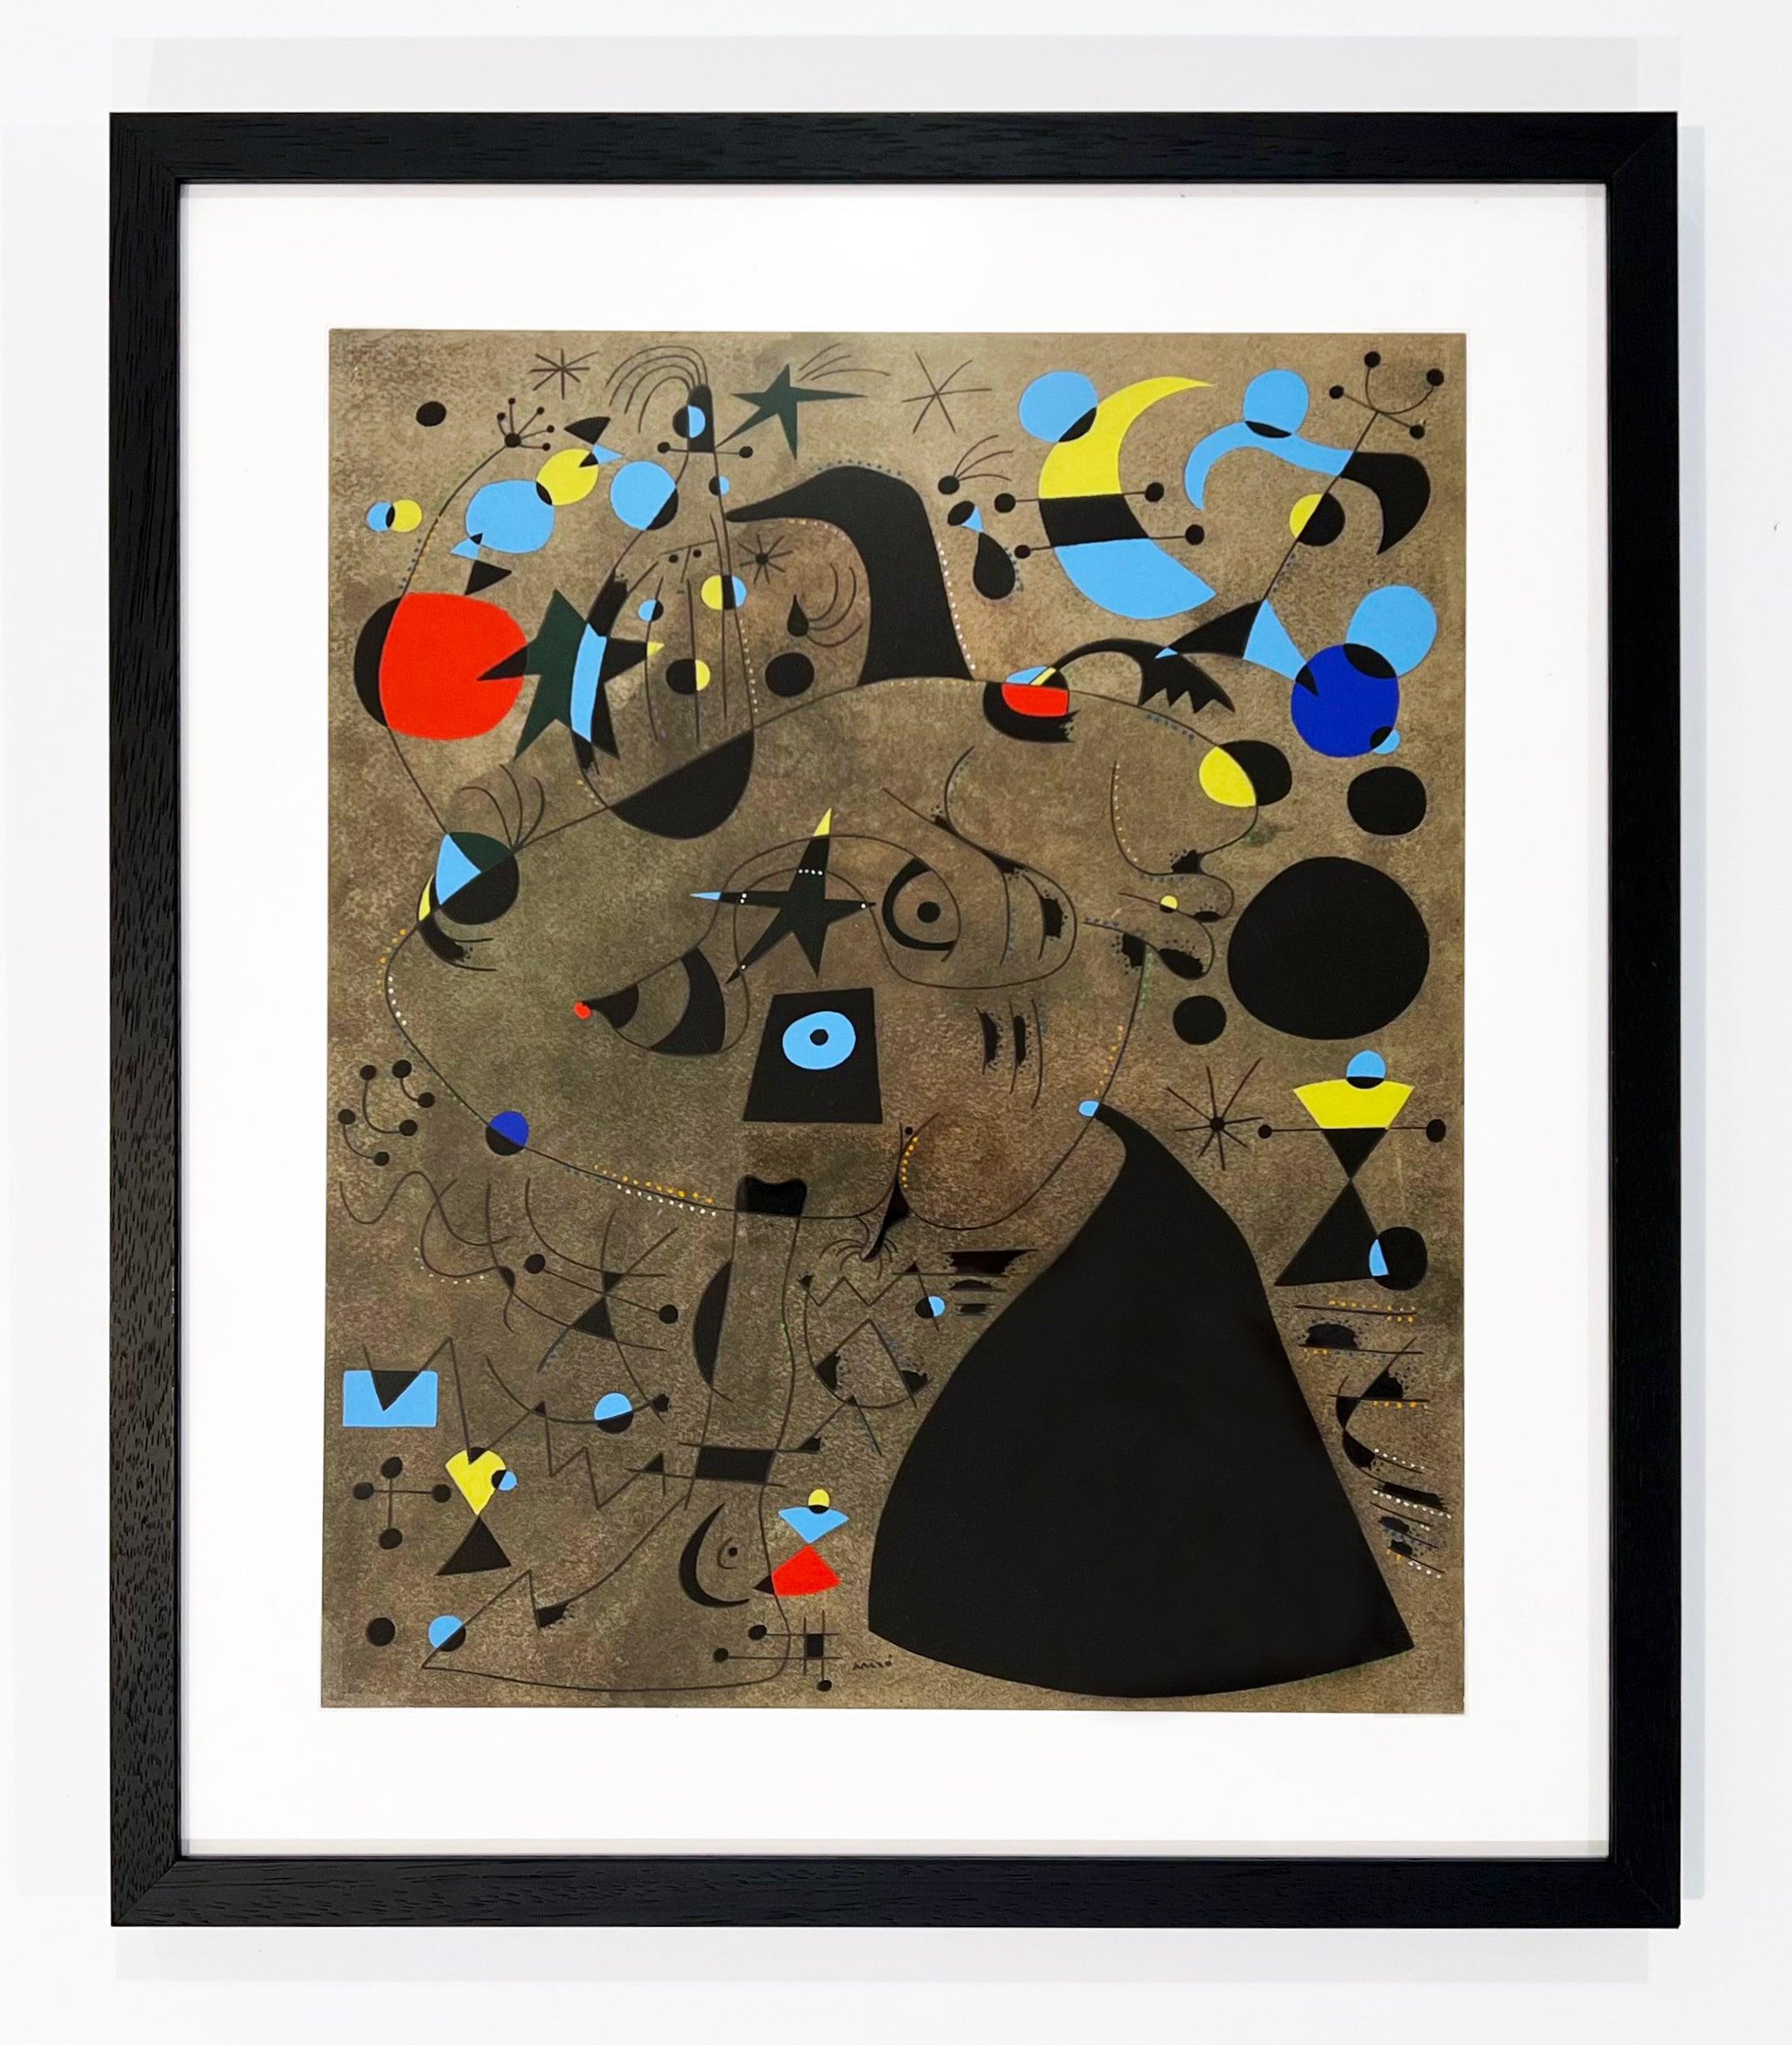 Joan Miro (after) Plate IX from 1959 Constellations - Print by (after) Joan Miró